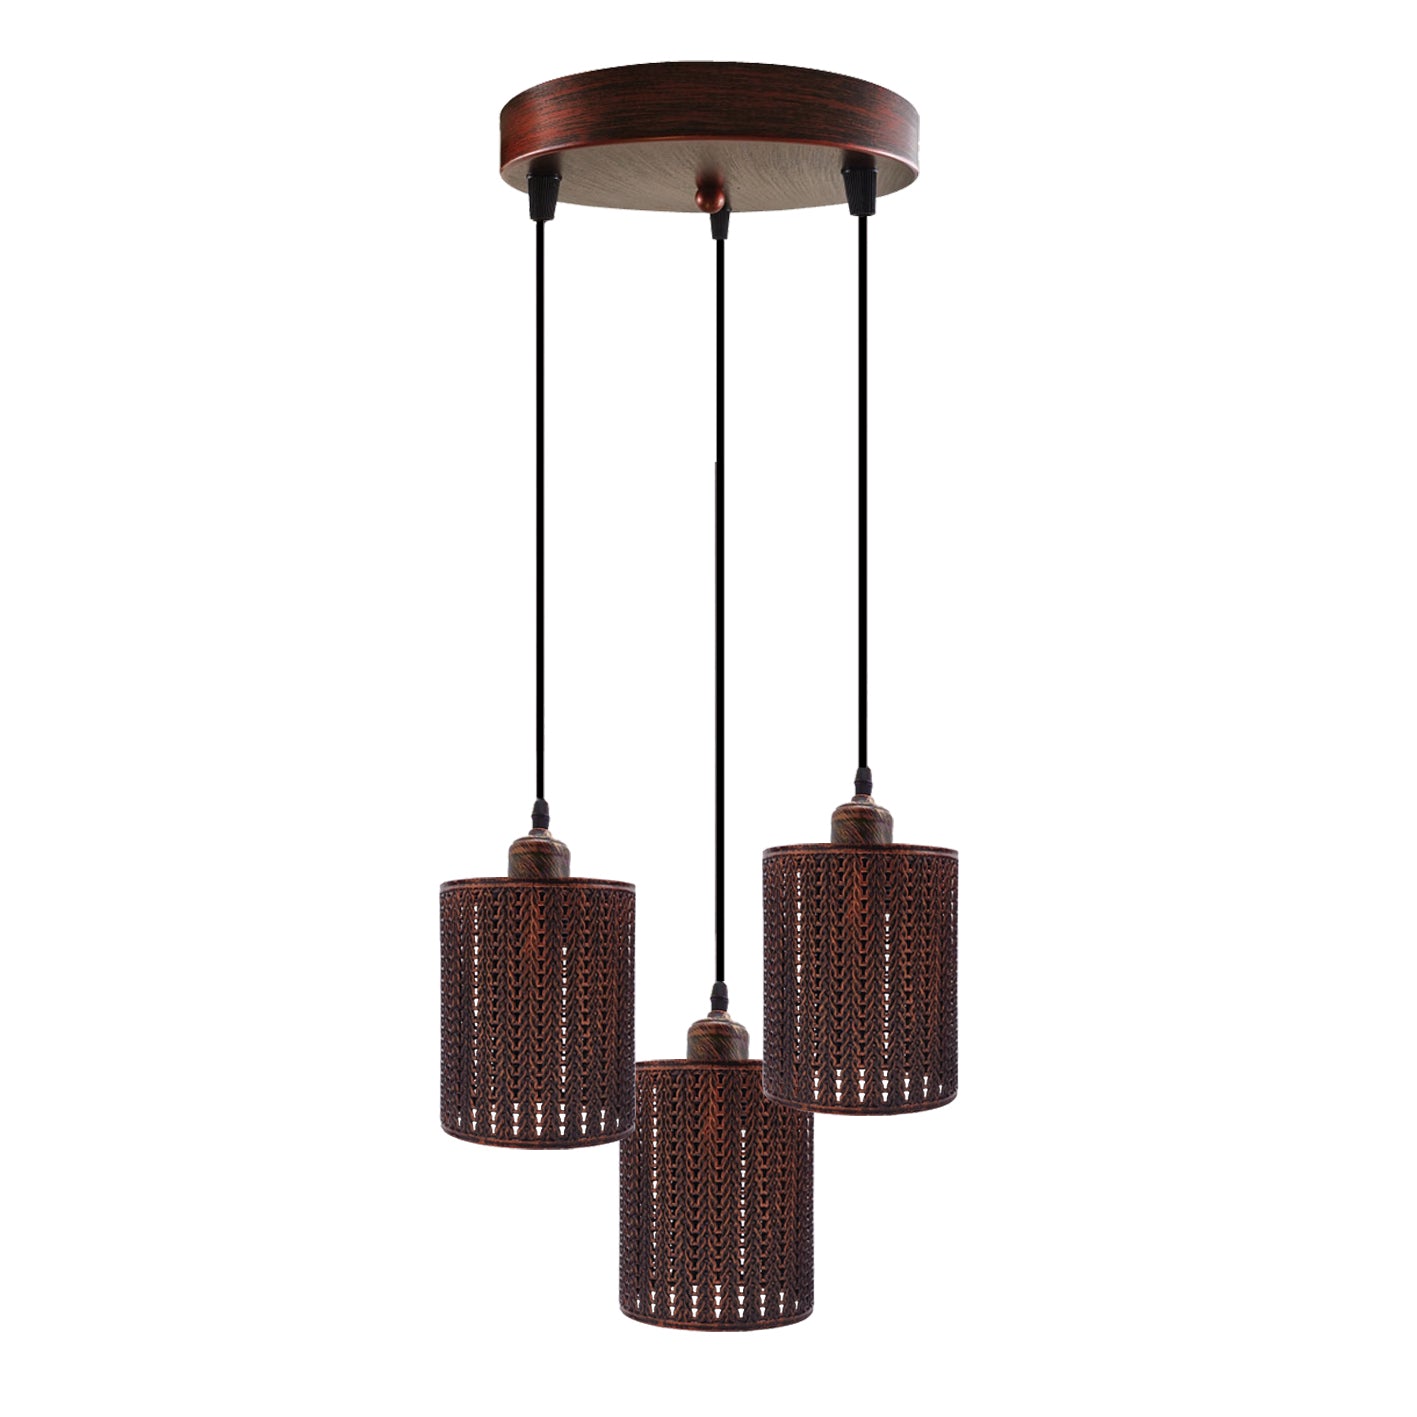 Industrial Retro pendant light 3 way Round ceiling base brushed finished Metal Ceiling Lamp Shade Pendant E27 lamp base for Home Living room Office Kitchen Restaurant